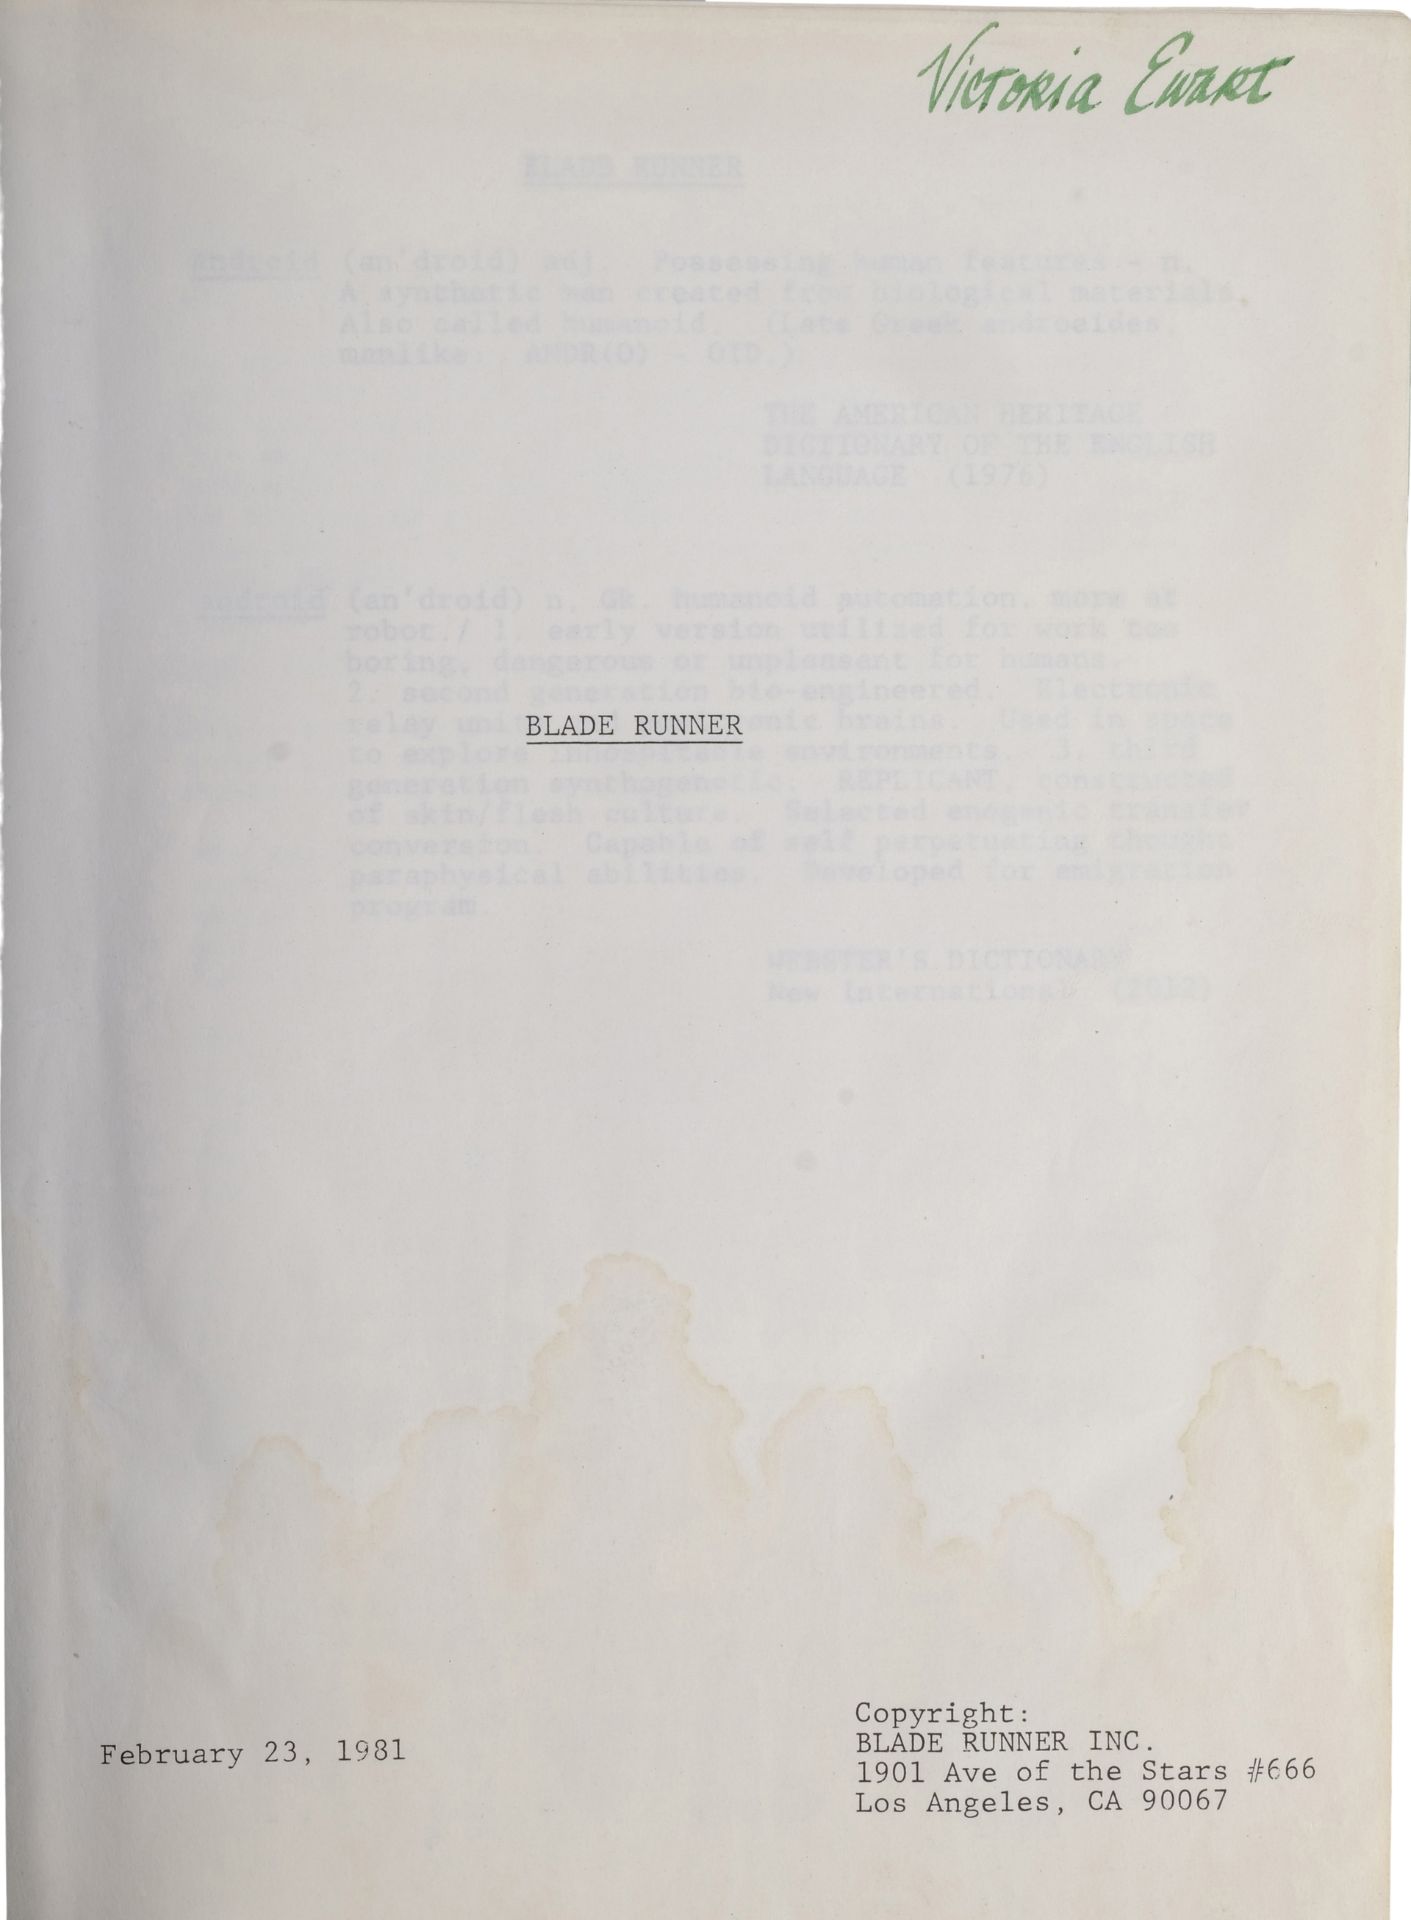 BLADE RUNNER (1982) - Producer's Assistant, Victoria Ewart's Personal Script - Image 2 of 8